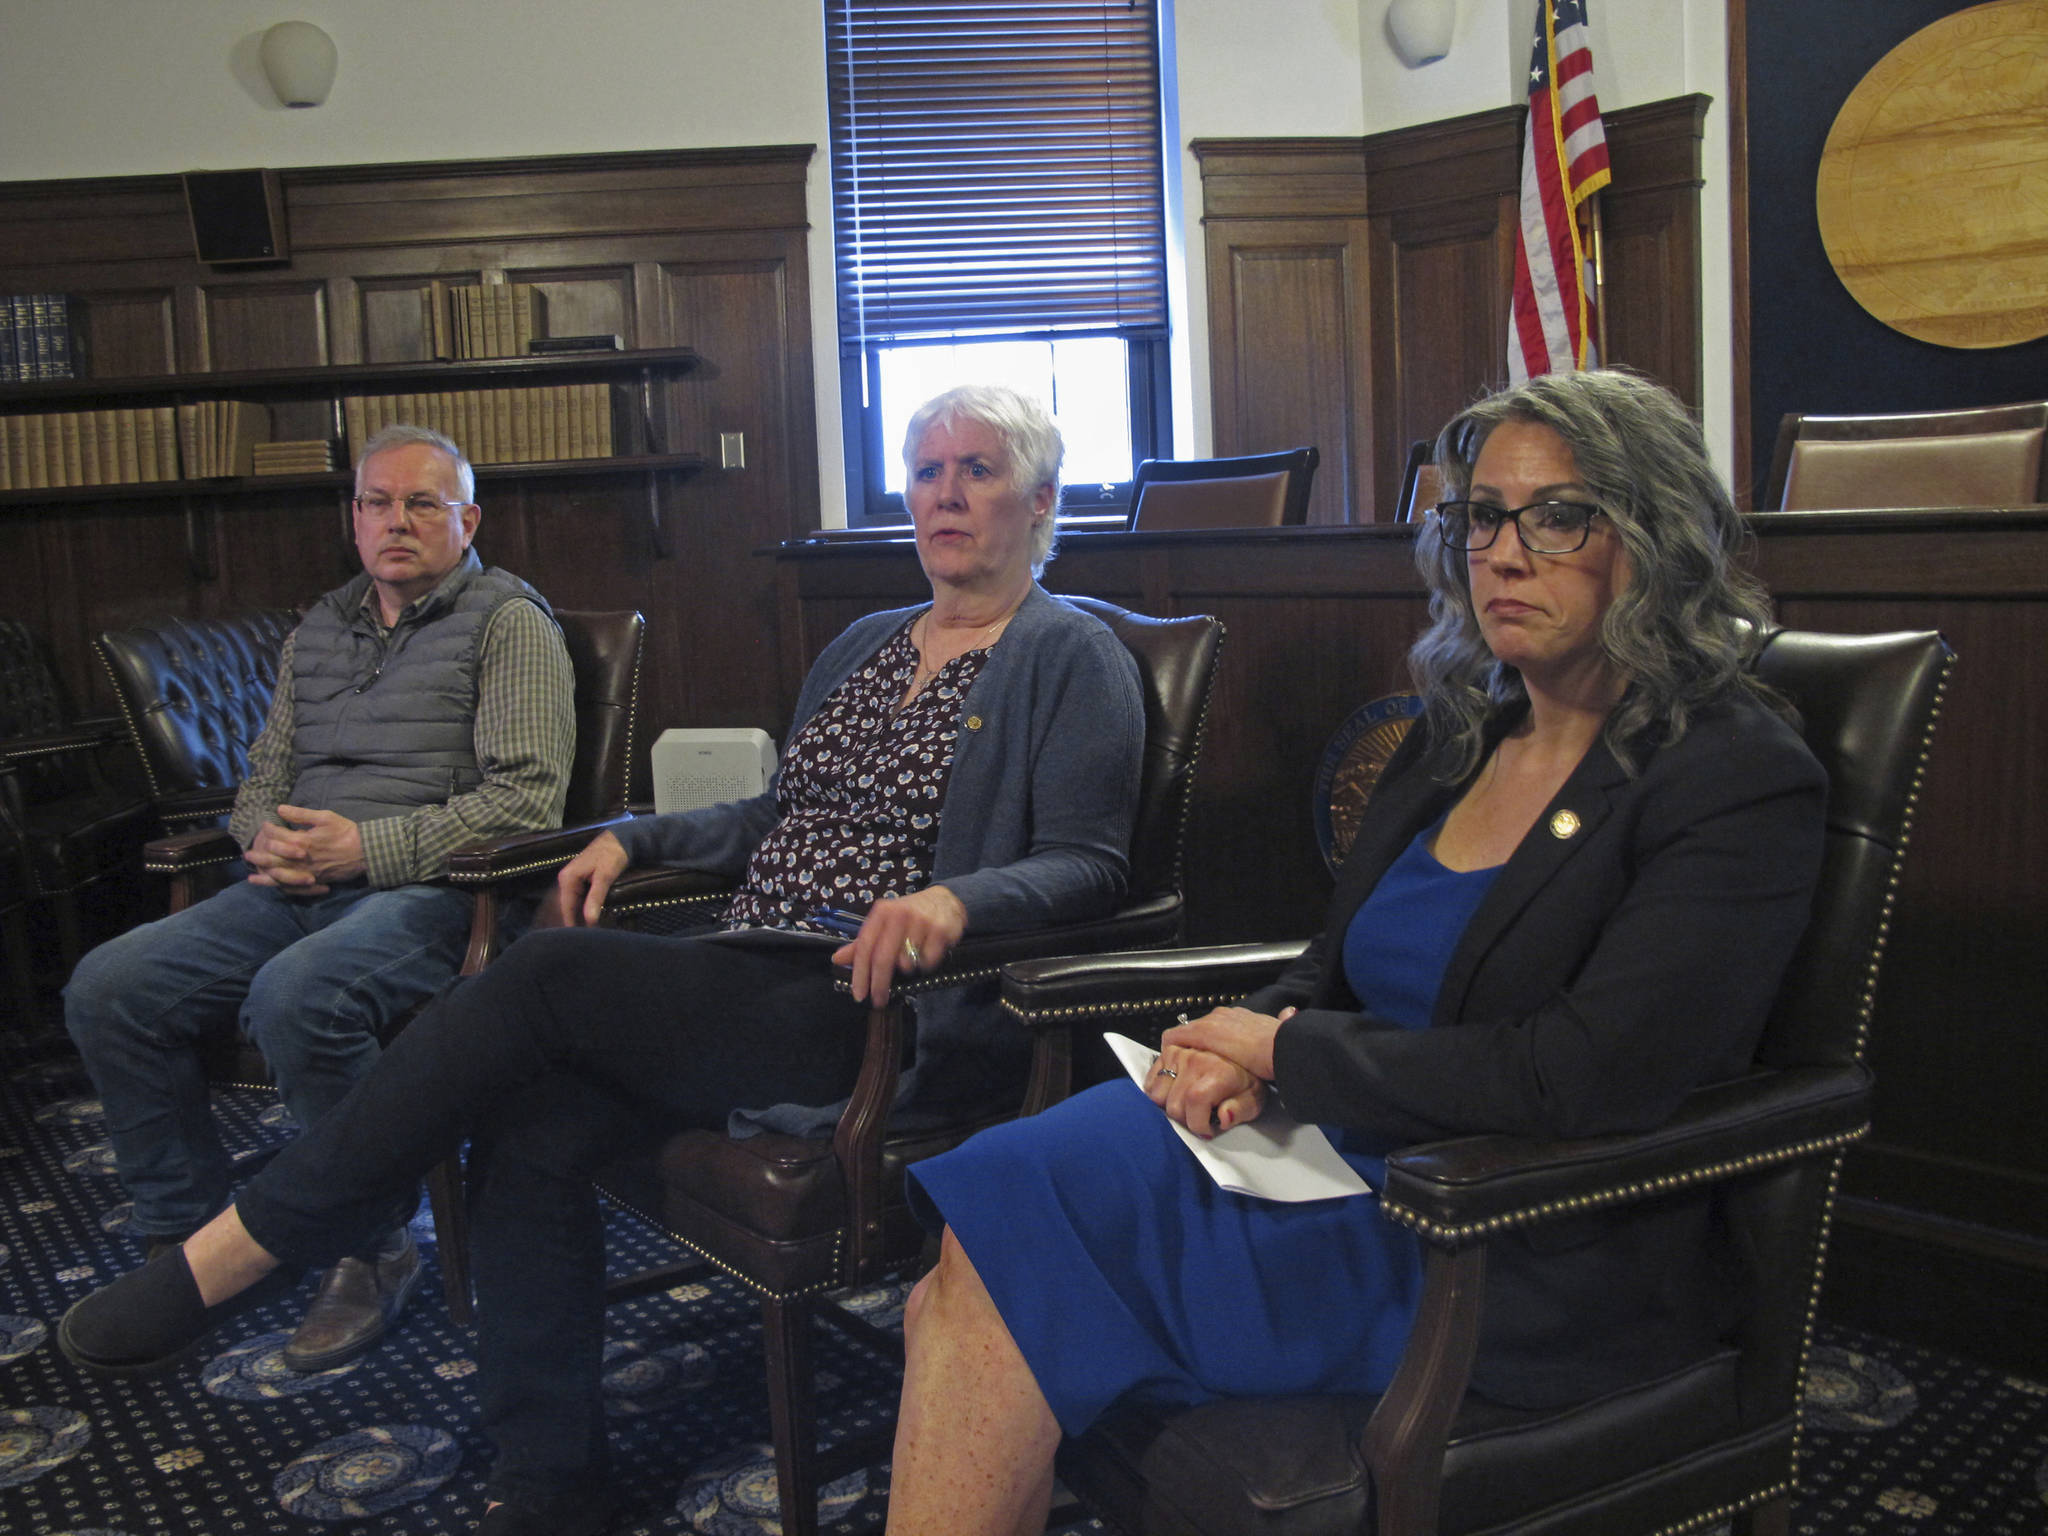 Alaska House Speaker Louise Stutes (center), along with leaders of the House majority coalition, Rep. Bryce Edgmon (left) and Rep. Kelly Merrick (right) speak to reporters on the final day of a special legislative session on Friday. The special legislative session limped toward a bitter end Friday, with Alaska Gov. Mike Dunleavy and House majority leaders sharply disagreeing over the adequacy of the budget passed by lawmakers earlier this week. (AP Photo/Becky Bohrer)